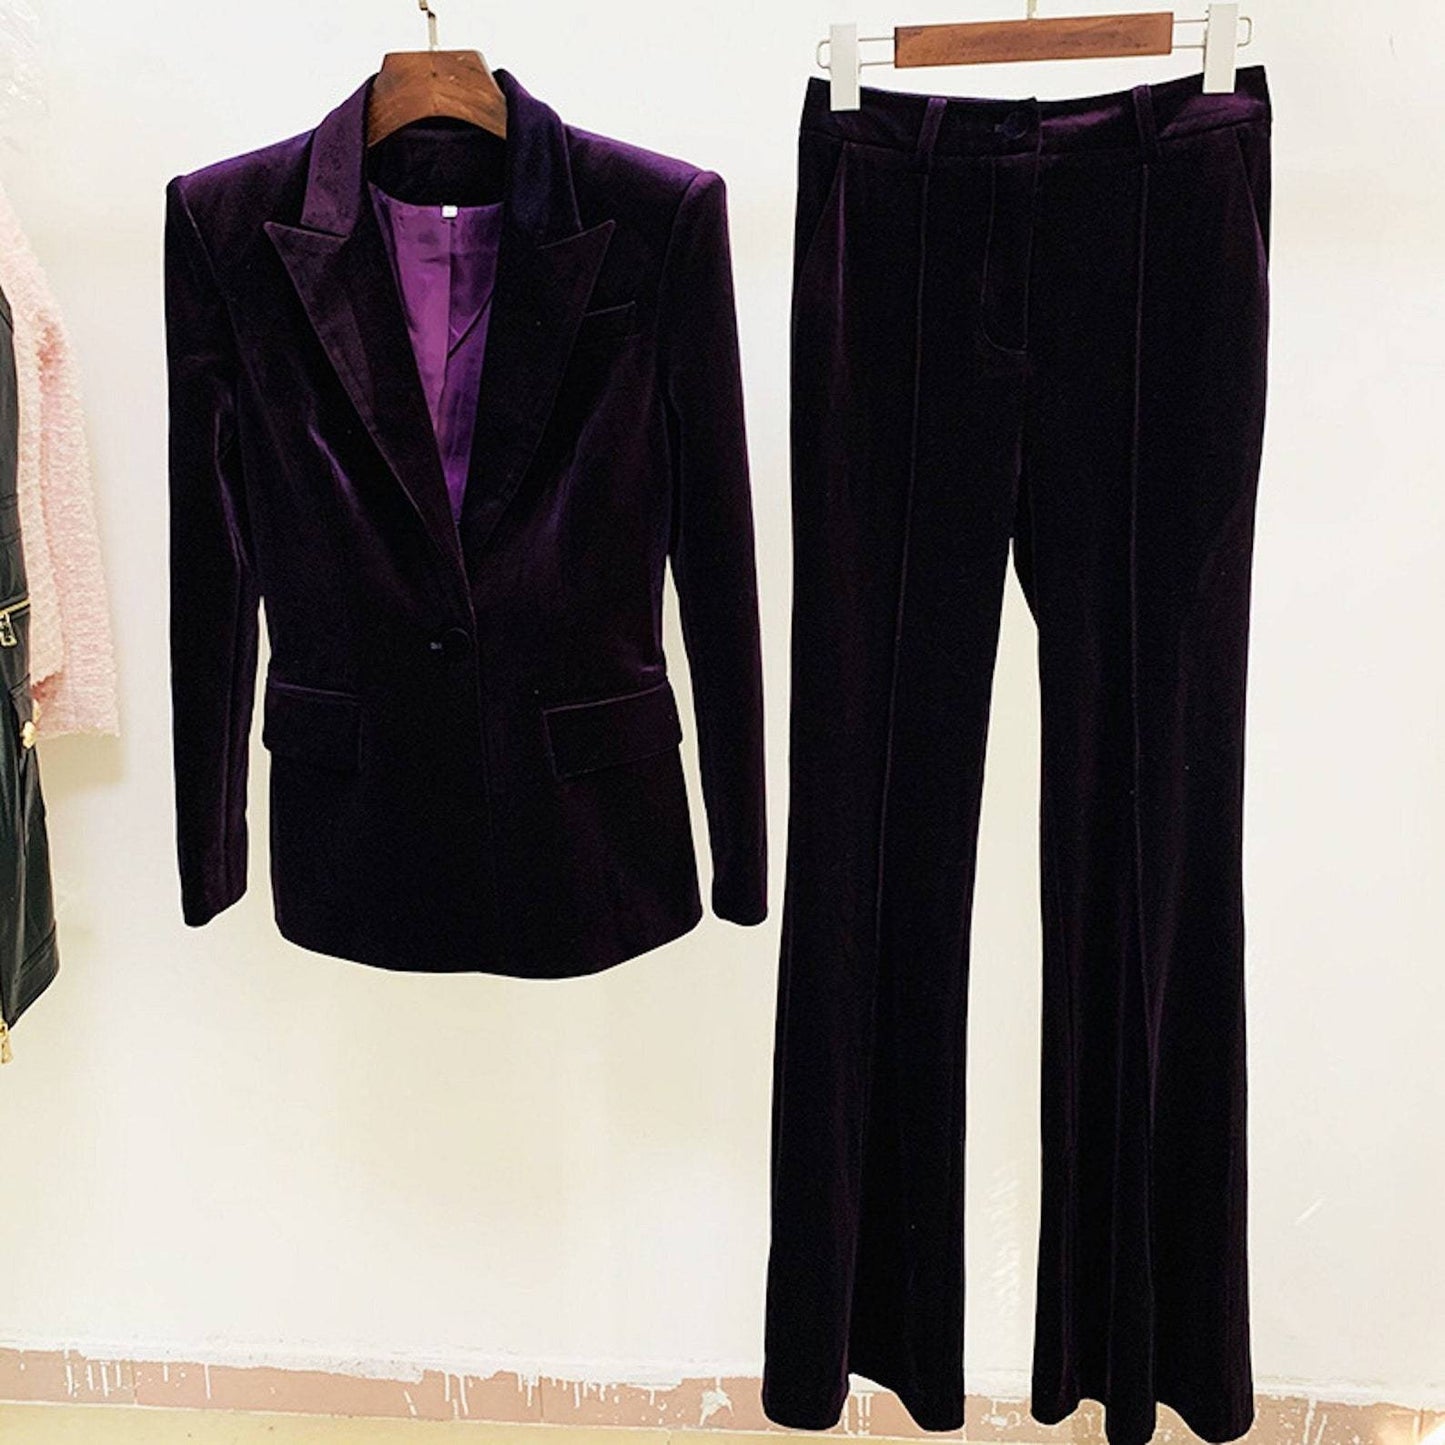 Fashion Pioneer -Purple Velvet Soft, light and stretchy. This blazer deserves a special mention for its stunning fabric alone, as it comes in smooth velvet with a gorgeously soft feel. Ultra chic and bang on-trend, it will take you from day to night with ease. This blazer is so cute and flattering. Paired with a pair of black slacks and a white is perfect for work! Dress it down with a pair of jeans! Very versatile and hits at just the right point. 